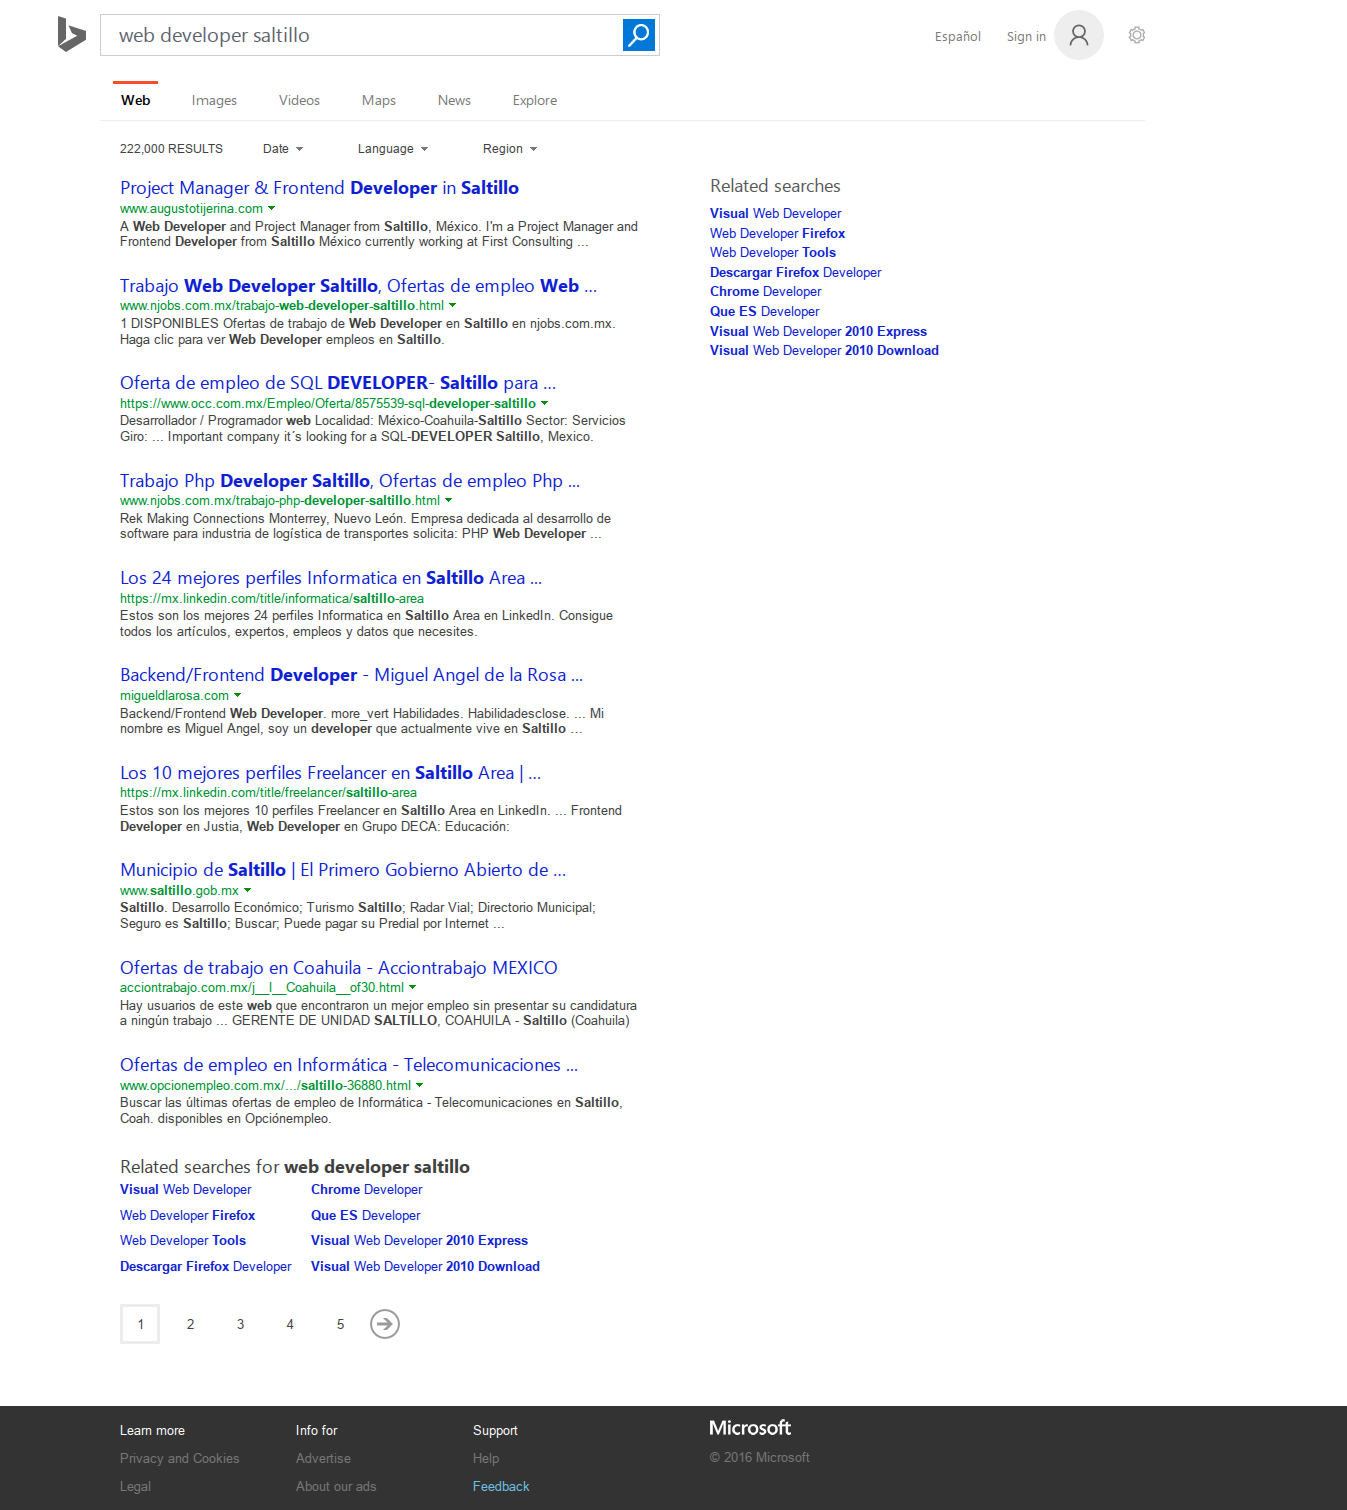 Bing Search Results